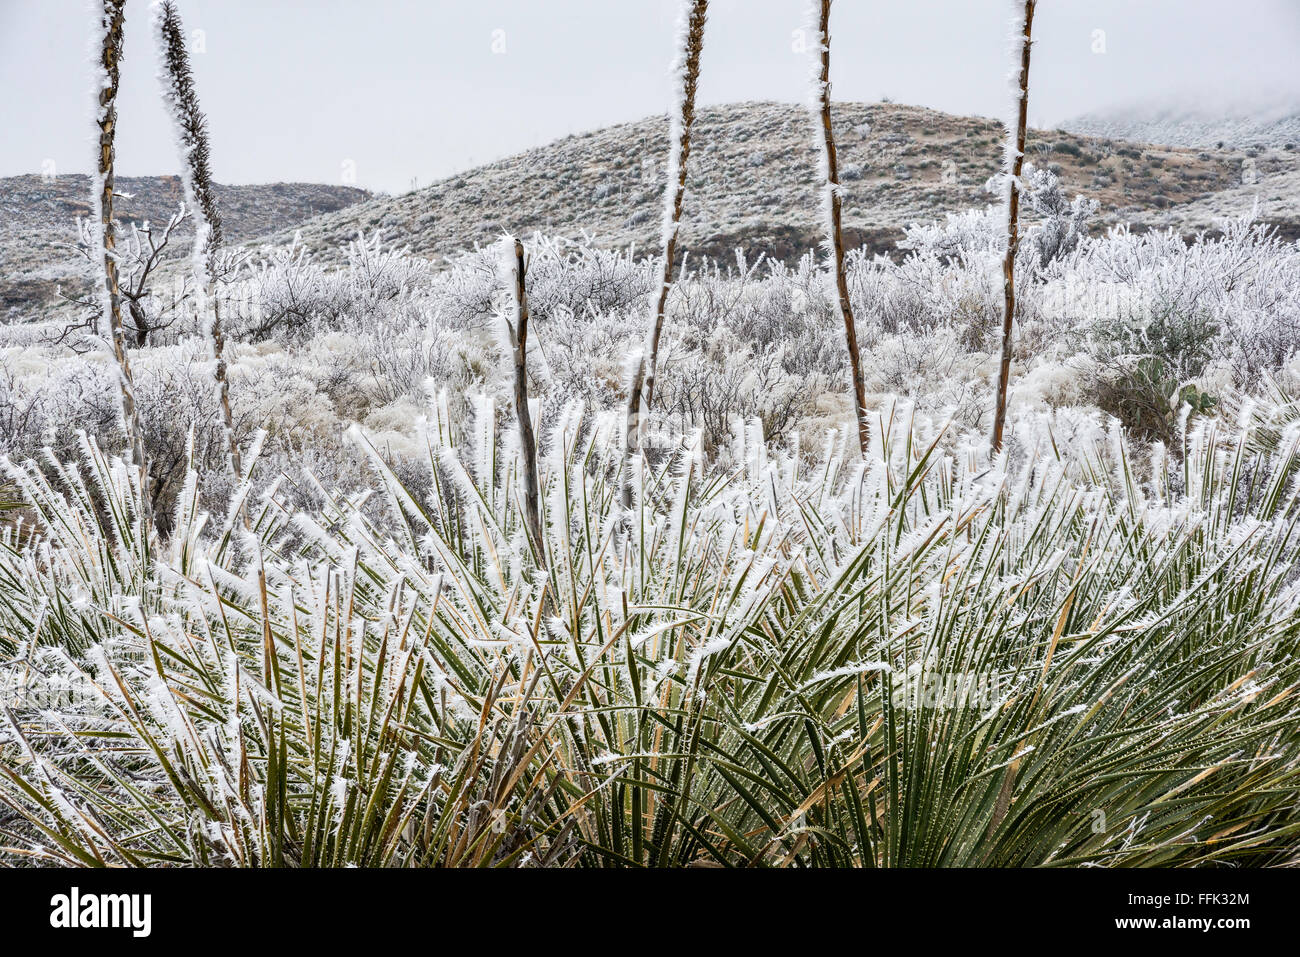 Sotol plants covered with frozen fog aka atmospheric icing in winter, Chihuahuan Desert, Big Bend National Park, Texas, USA Stock Photo